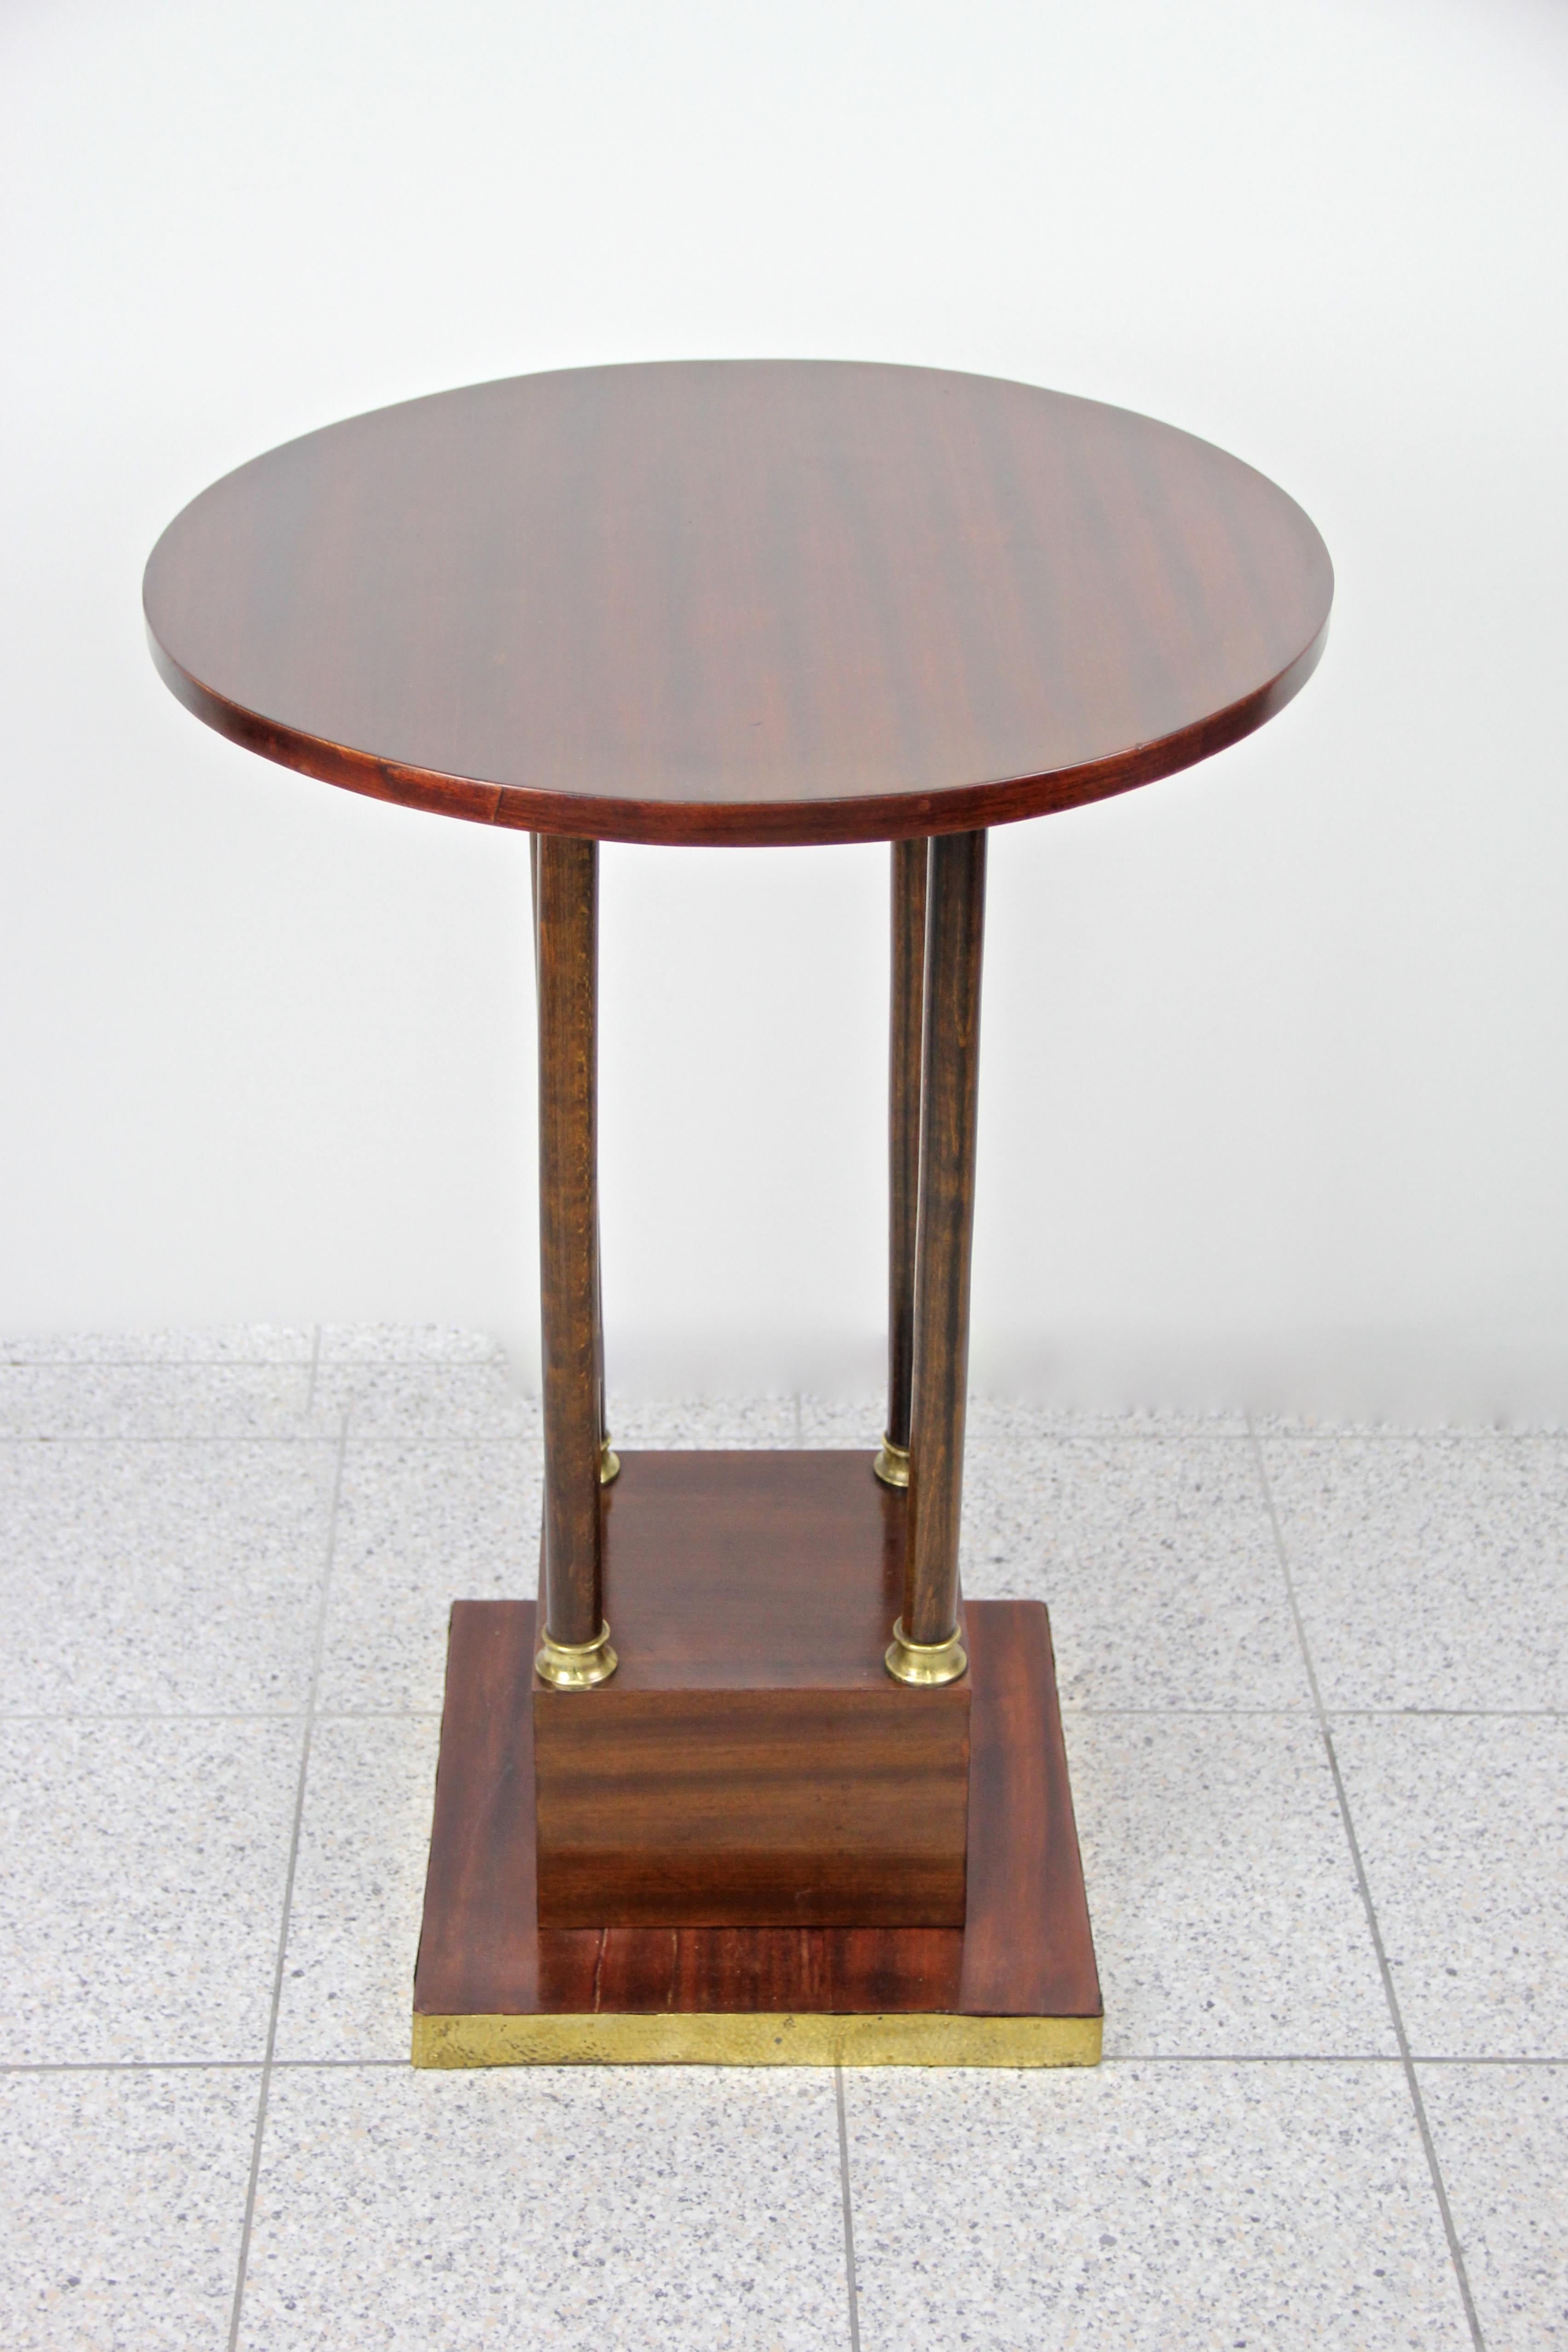 Exceptional round Art Nouveau mahogany coffee table from the early 20th century in Austria. Artfully handcrafted around 1910 in Vienna, this round coffee or side table impresses with an absolute outstanding design: finest mahogany veneer was used in